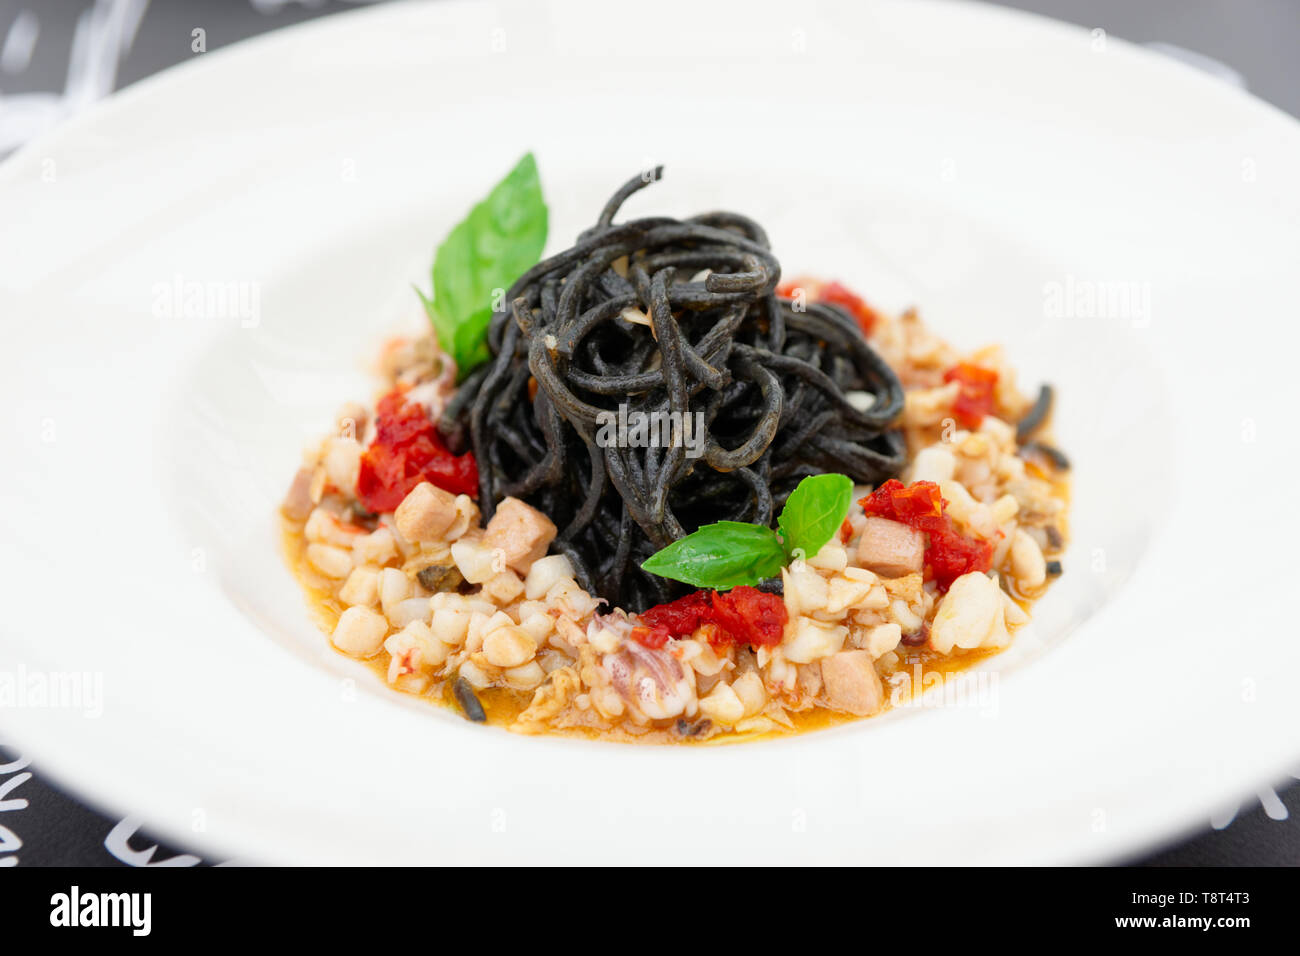 Black squid ink pasta with seafood, close-up Stock Photo